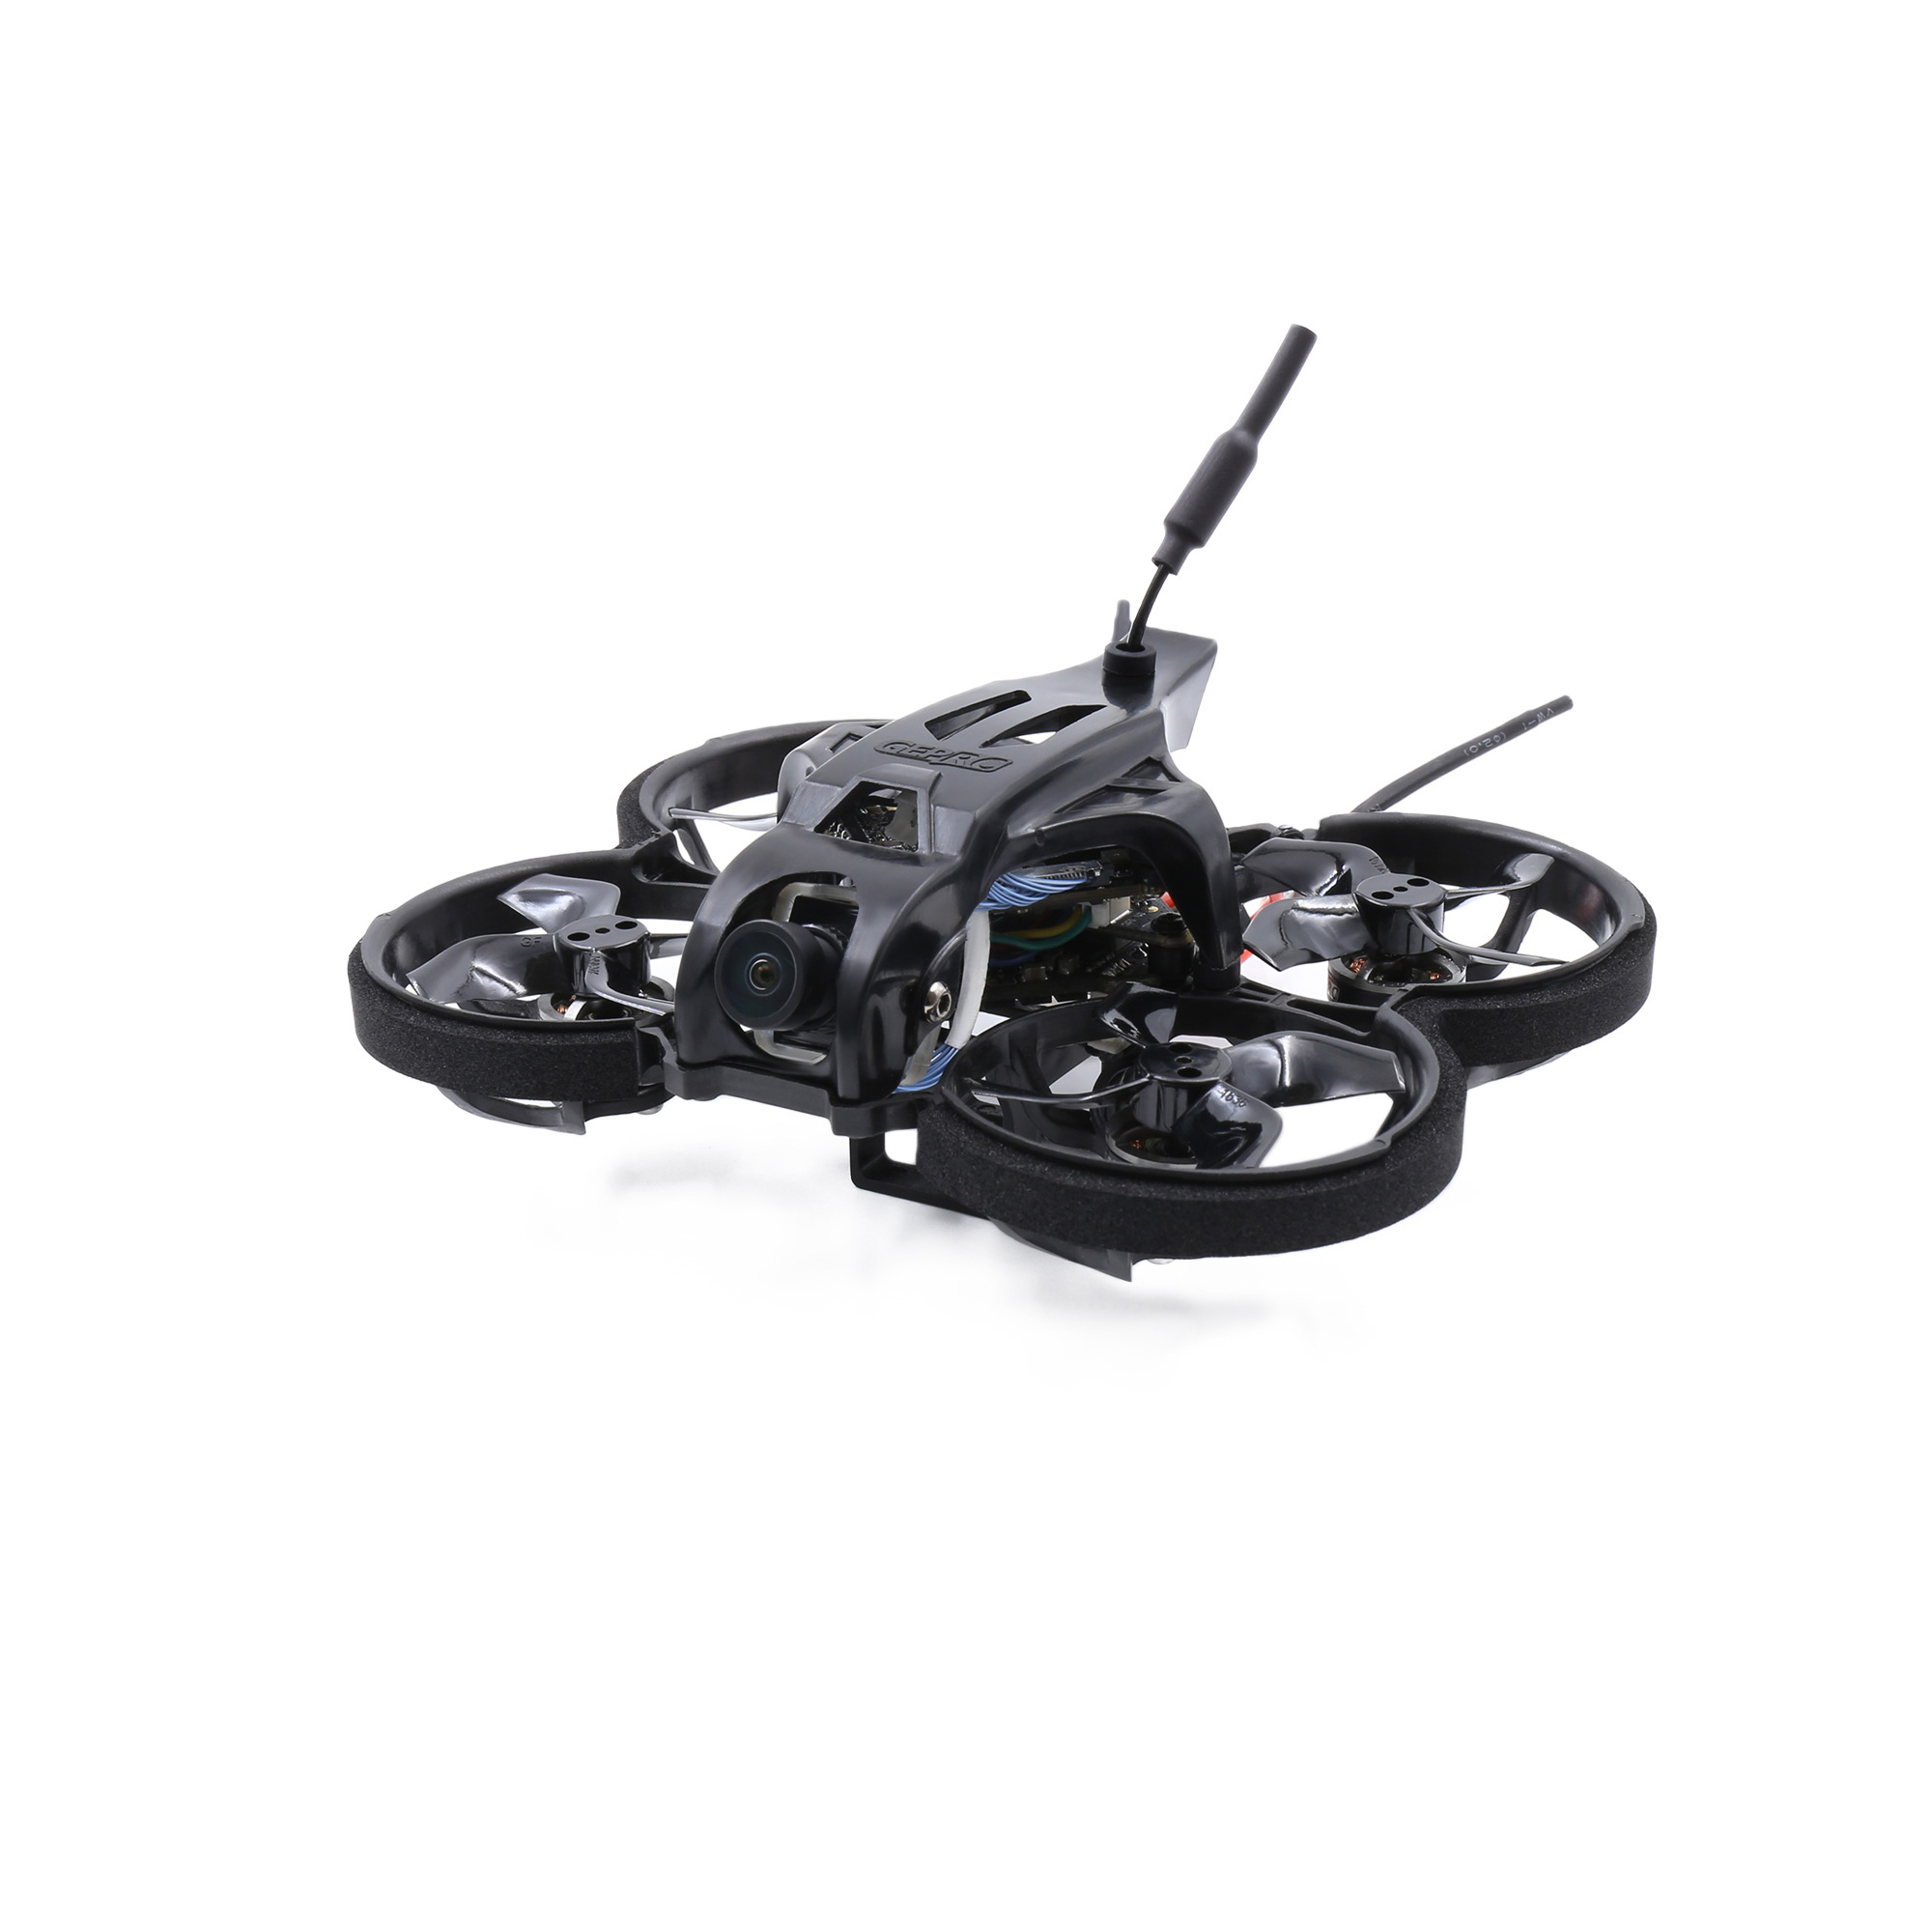 GEPRC TinyGO 1.6inch 2S 4K Caddx Loris FPV Indoor Whoop+GR8 Remote Controller+RG1 Goggles RTF Ready To Fly FPV Racing RC Drone 4